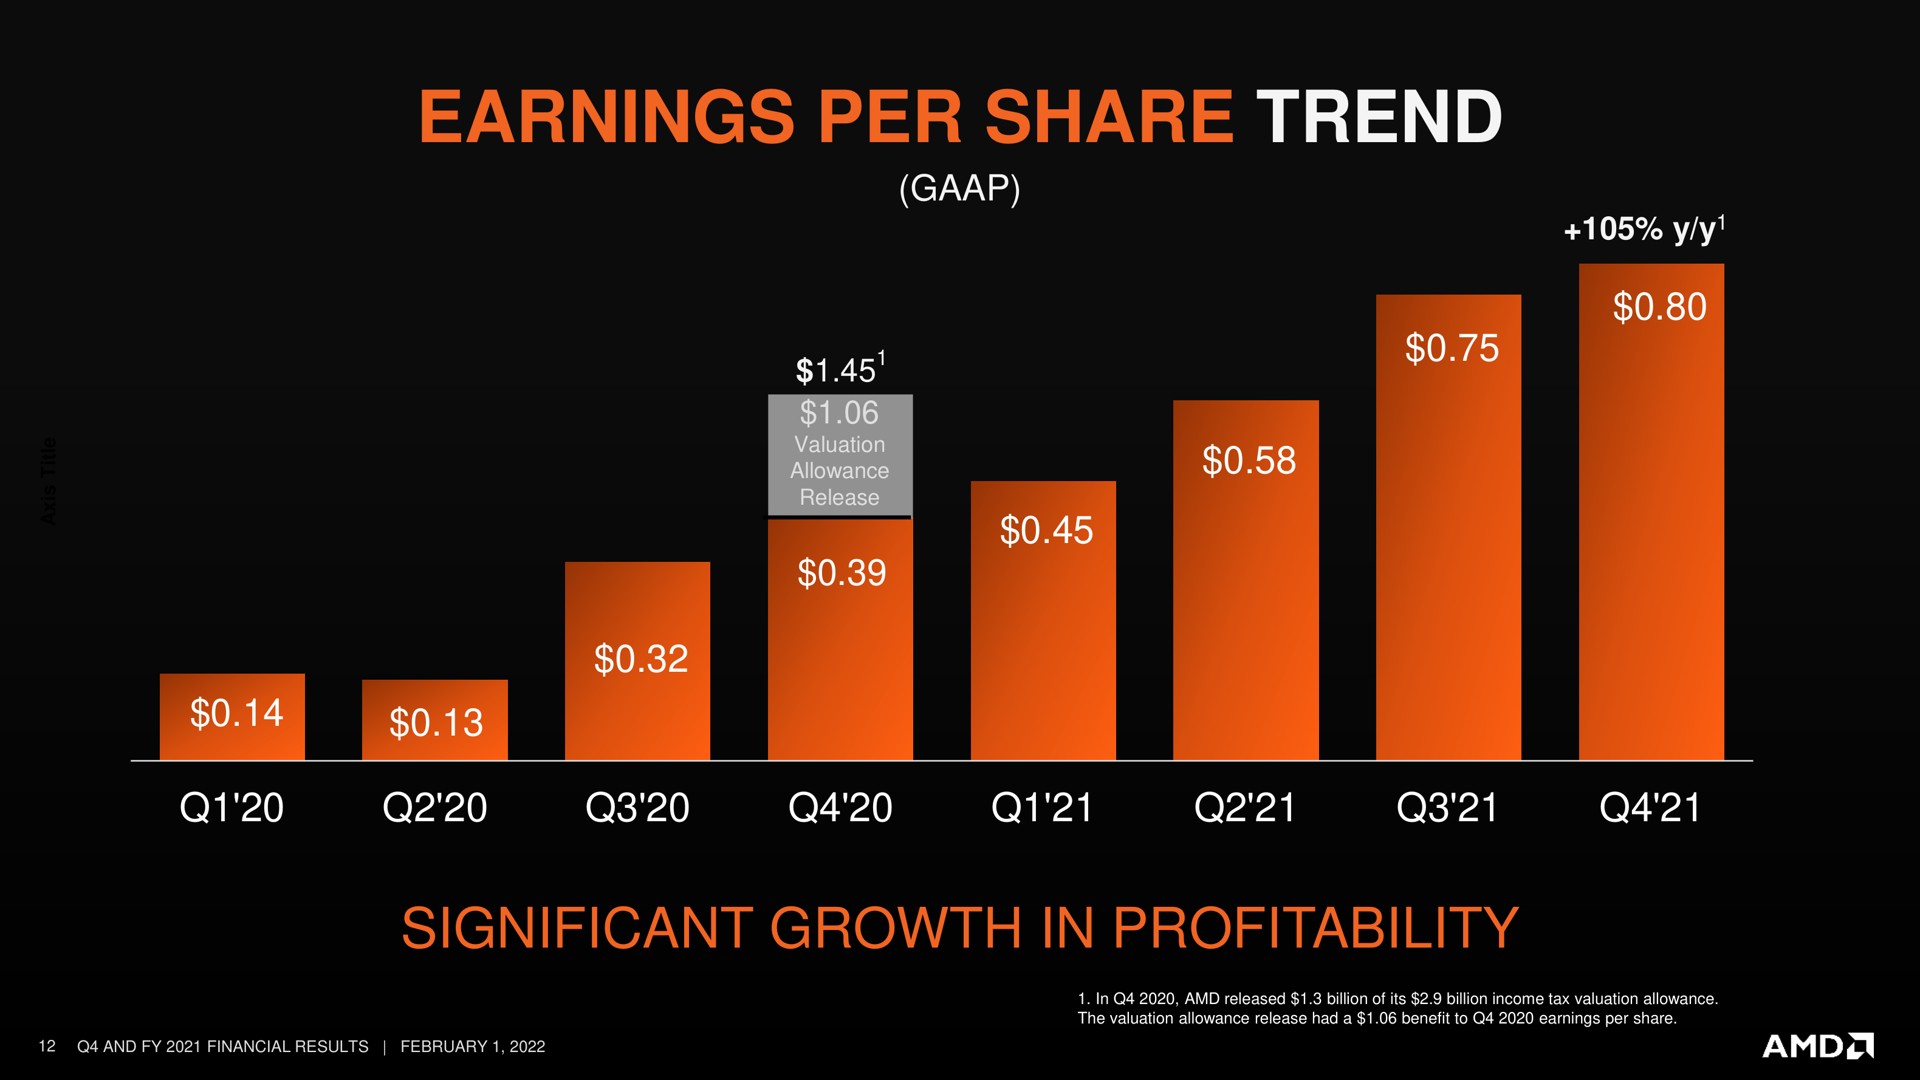 earnings per share trend lee vat significant growth in profitability | AMD